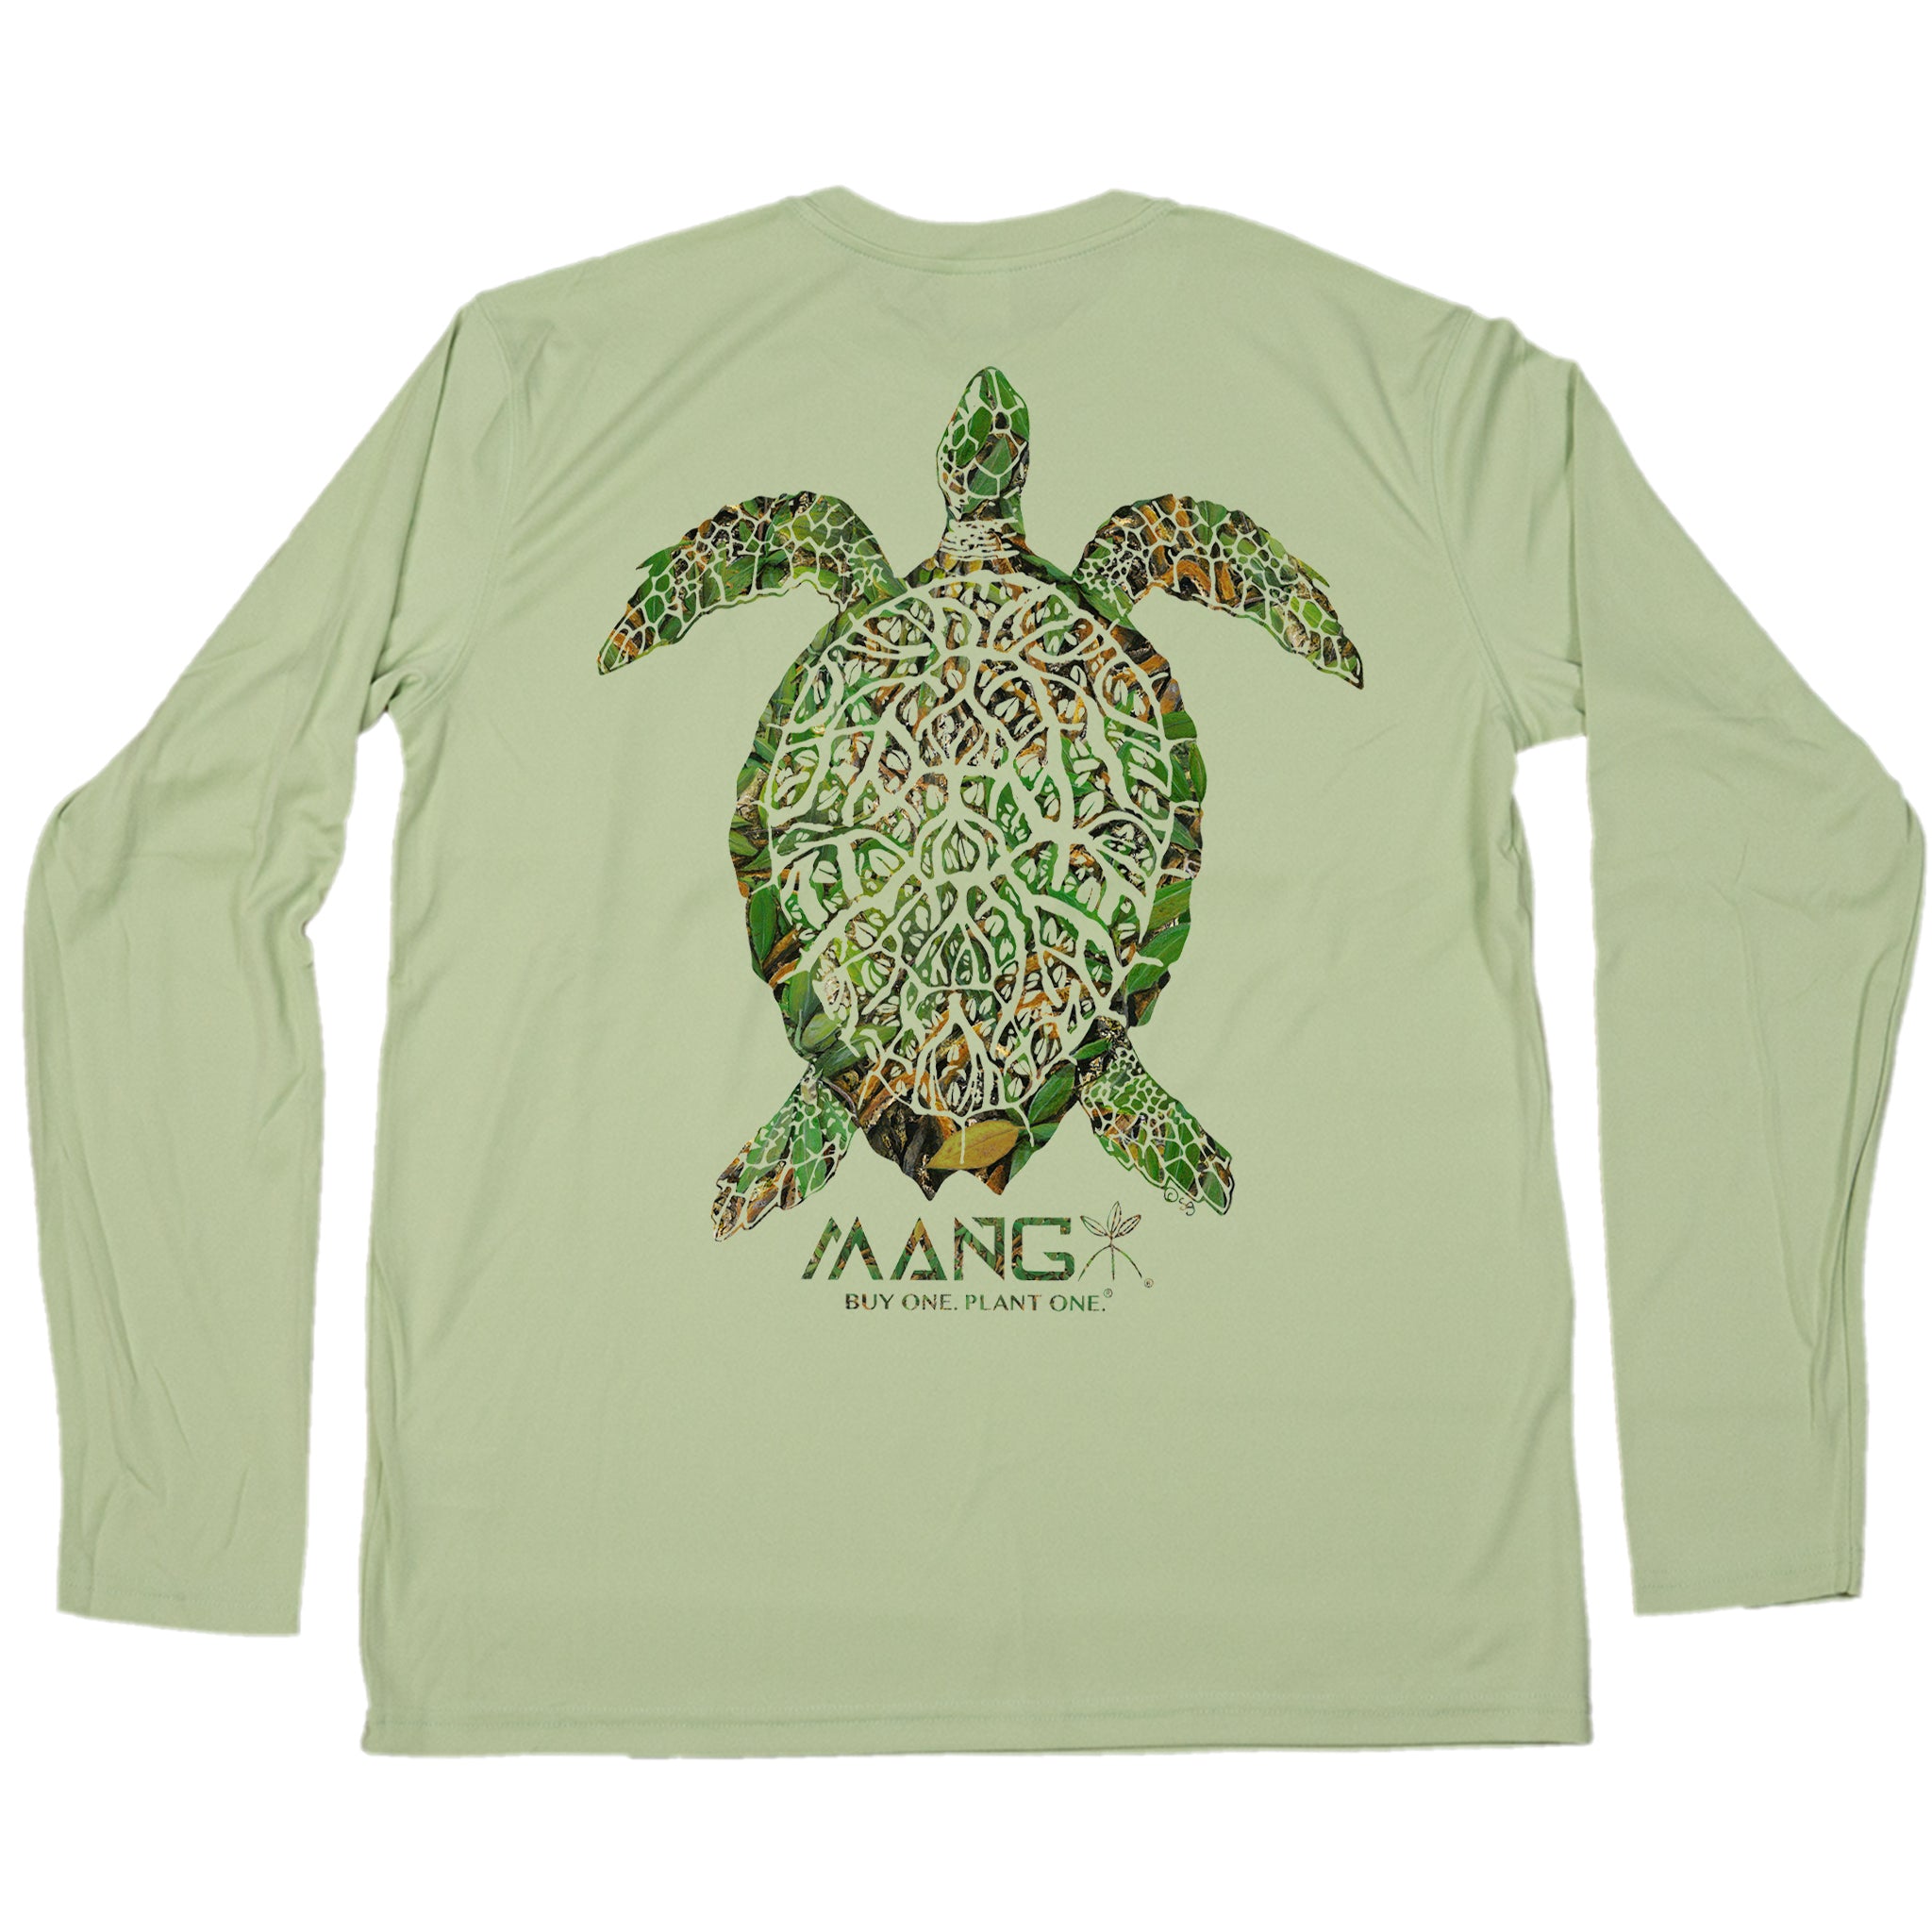 MANG Gear Grassy Turtle Seagrass - Size - M